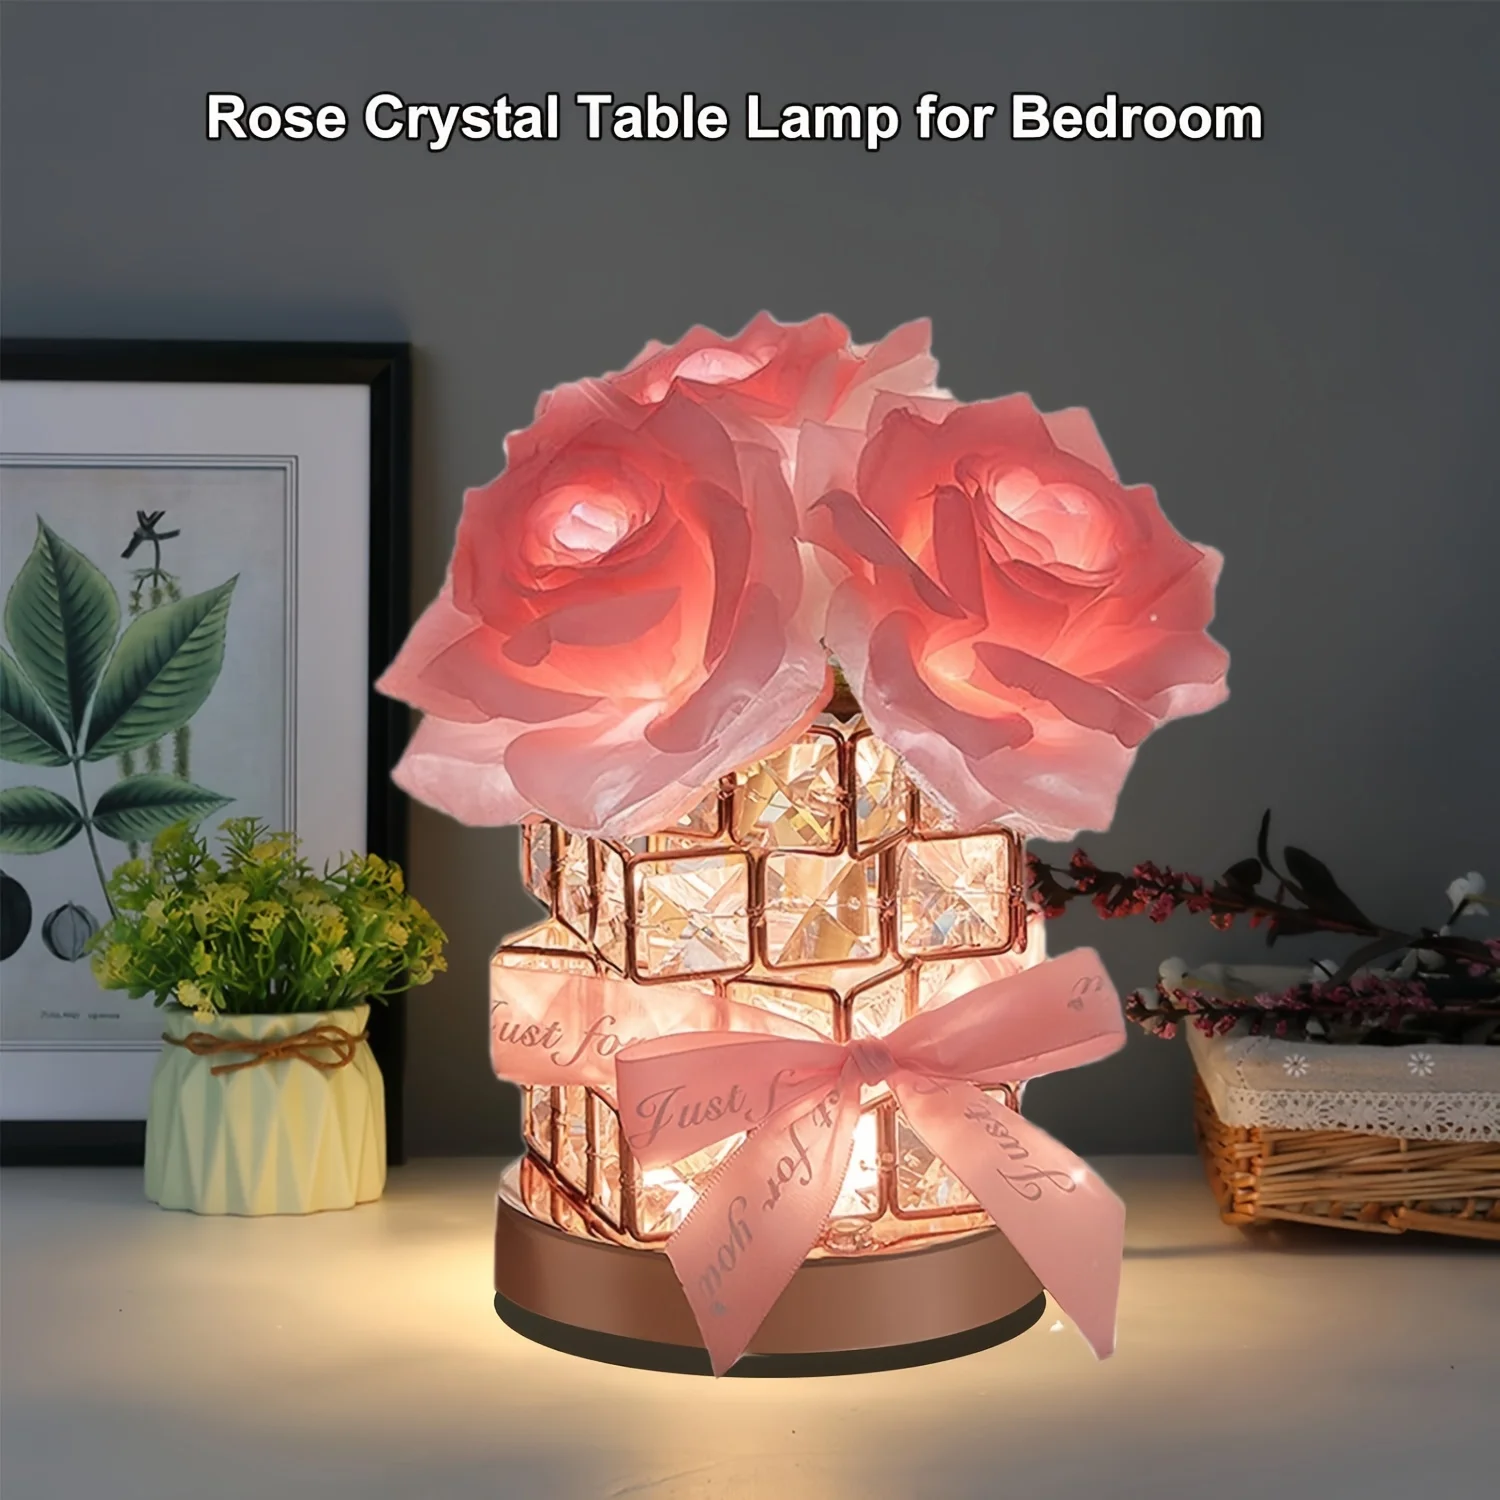 

LED 3color Decorative Table Lamps Romantic Crystal Rose Holiday Gift for Girl Friend Valentine's Day Birthday Aromatherapy Night